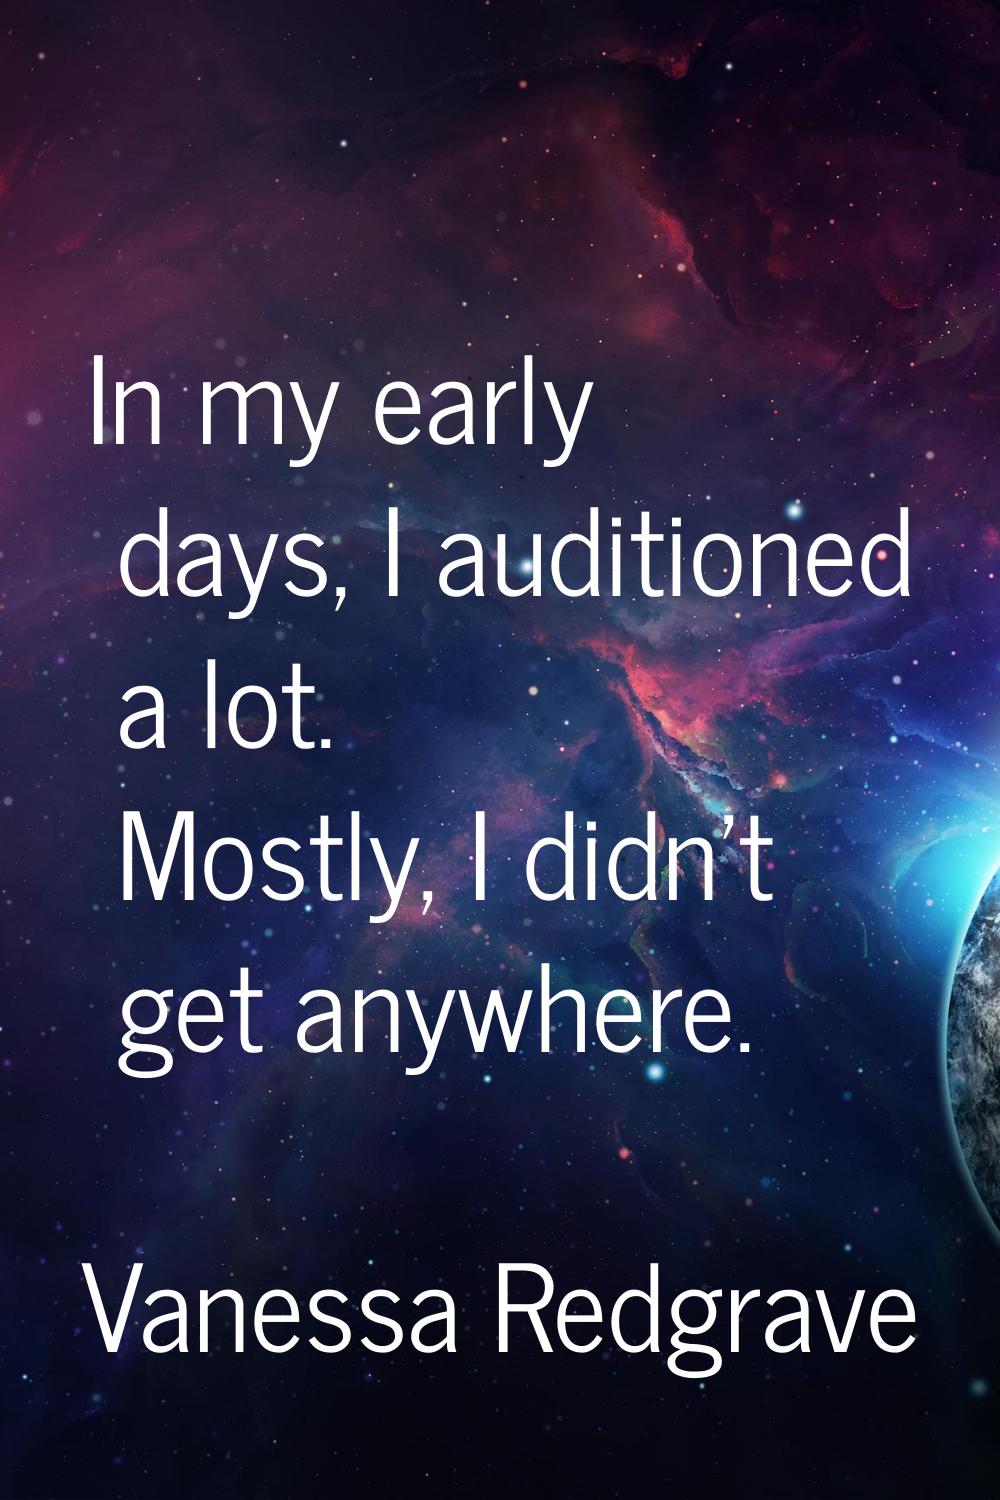 In my early days, I auditioned a lot. Mostly, I didn't get anywhere.